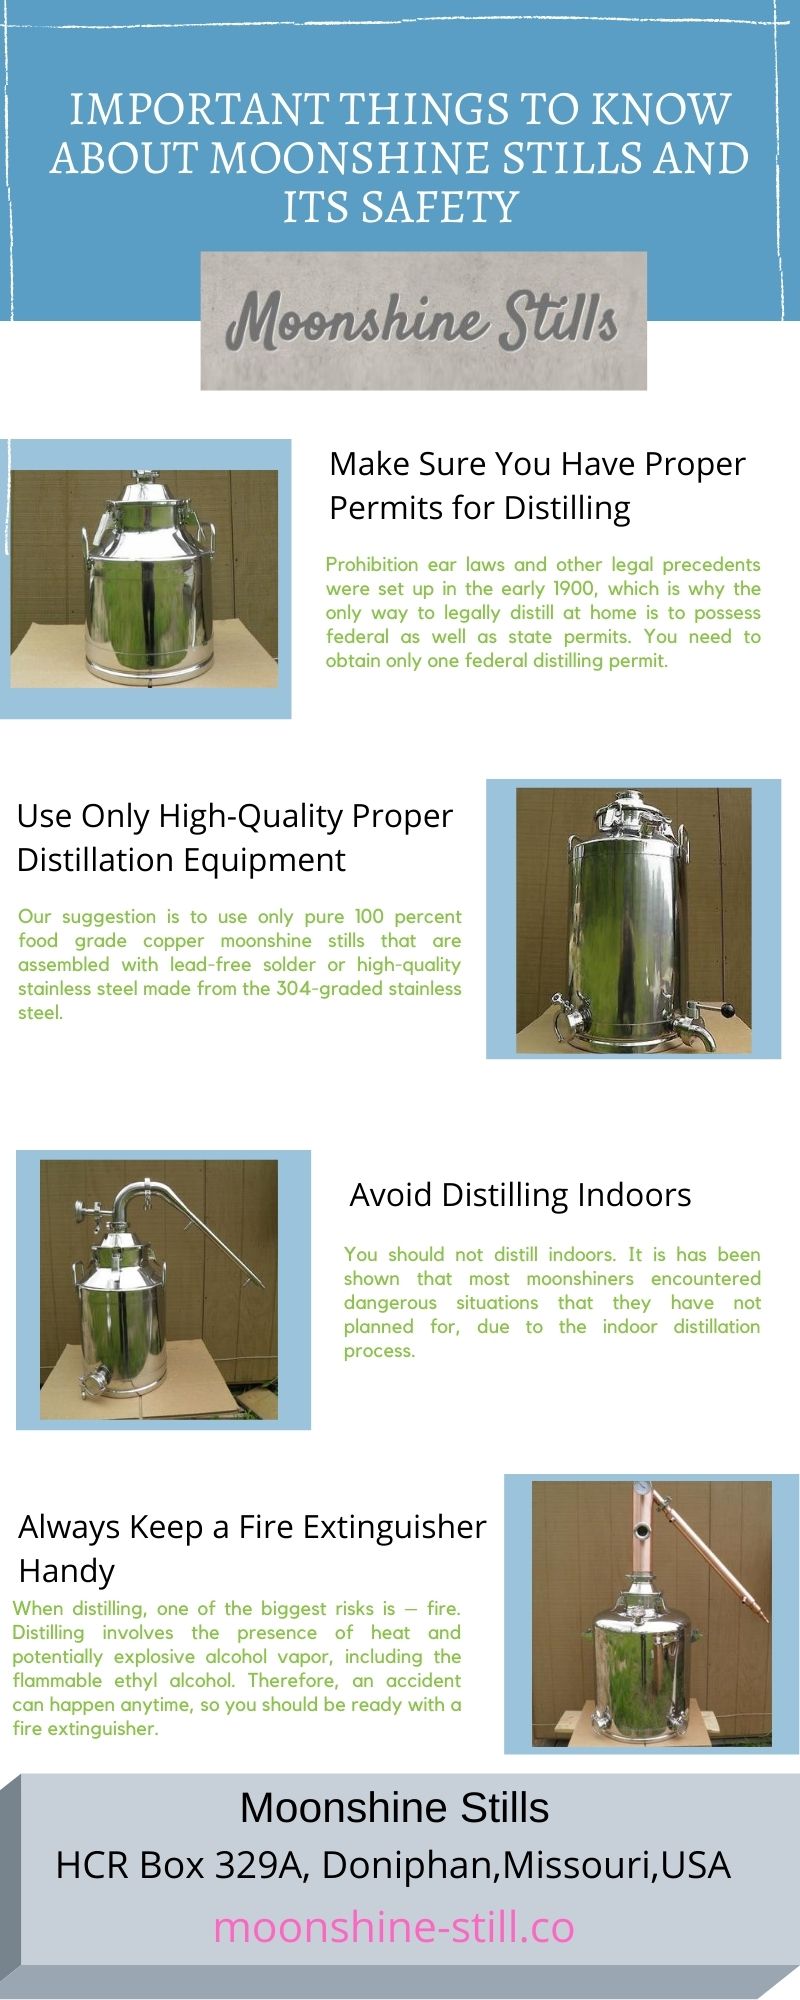 Important Things to Know About Moonshine Stills and Its Safety.jpg  by moonshinestill